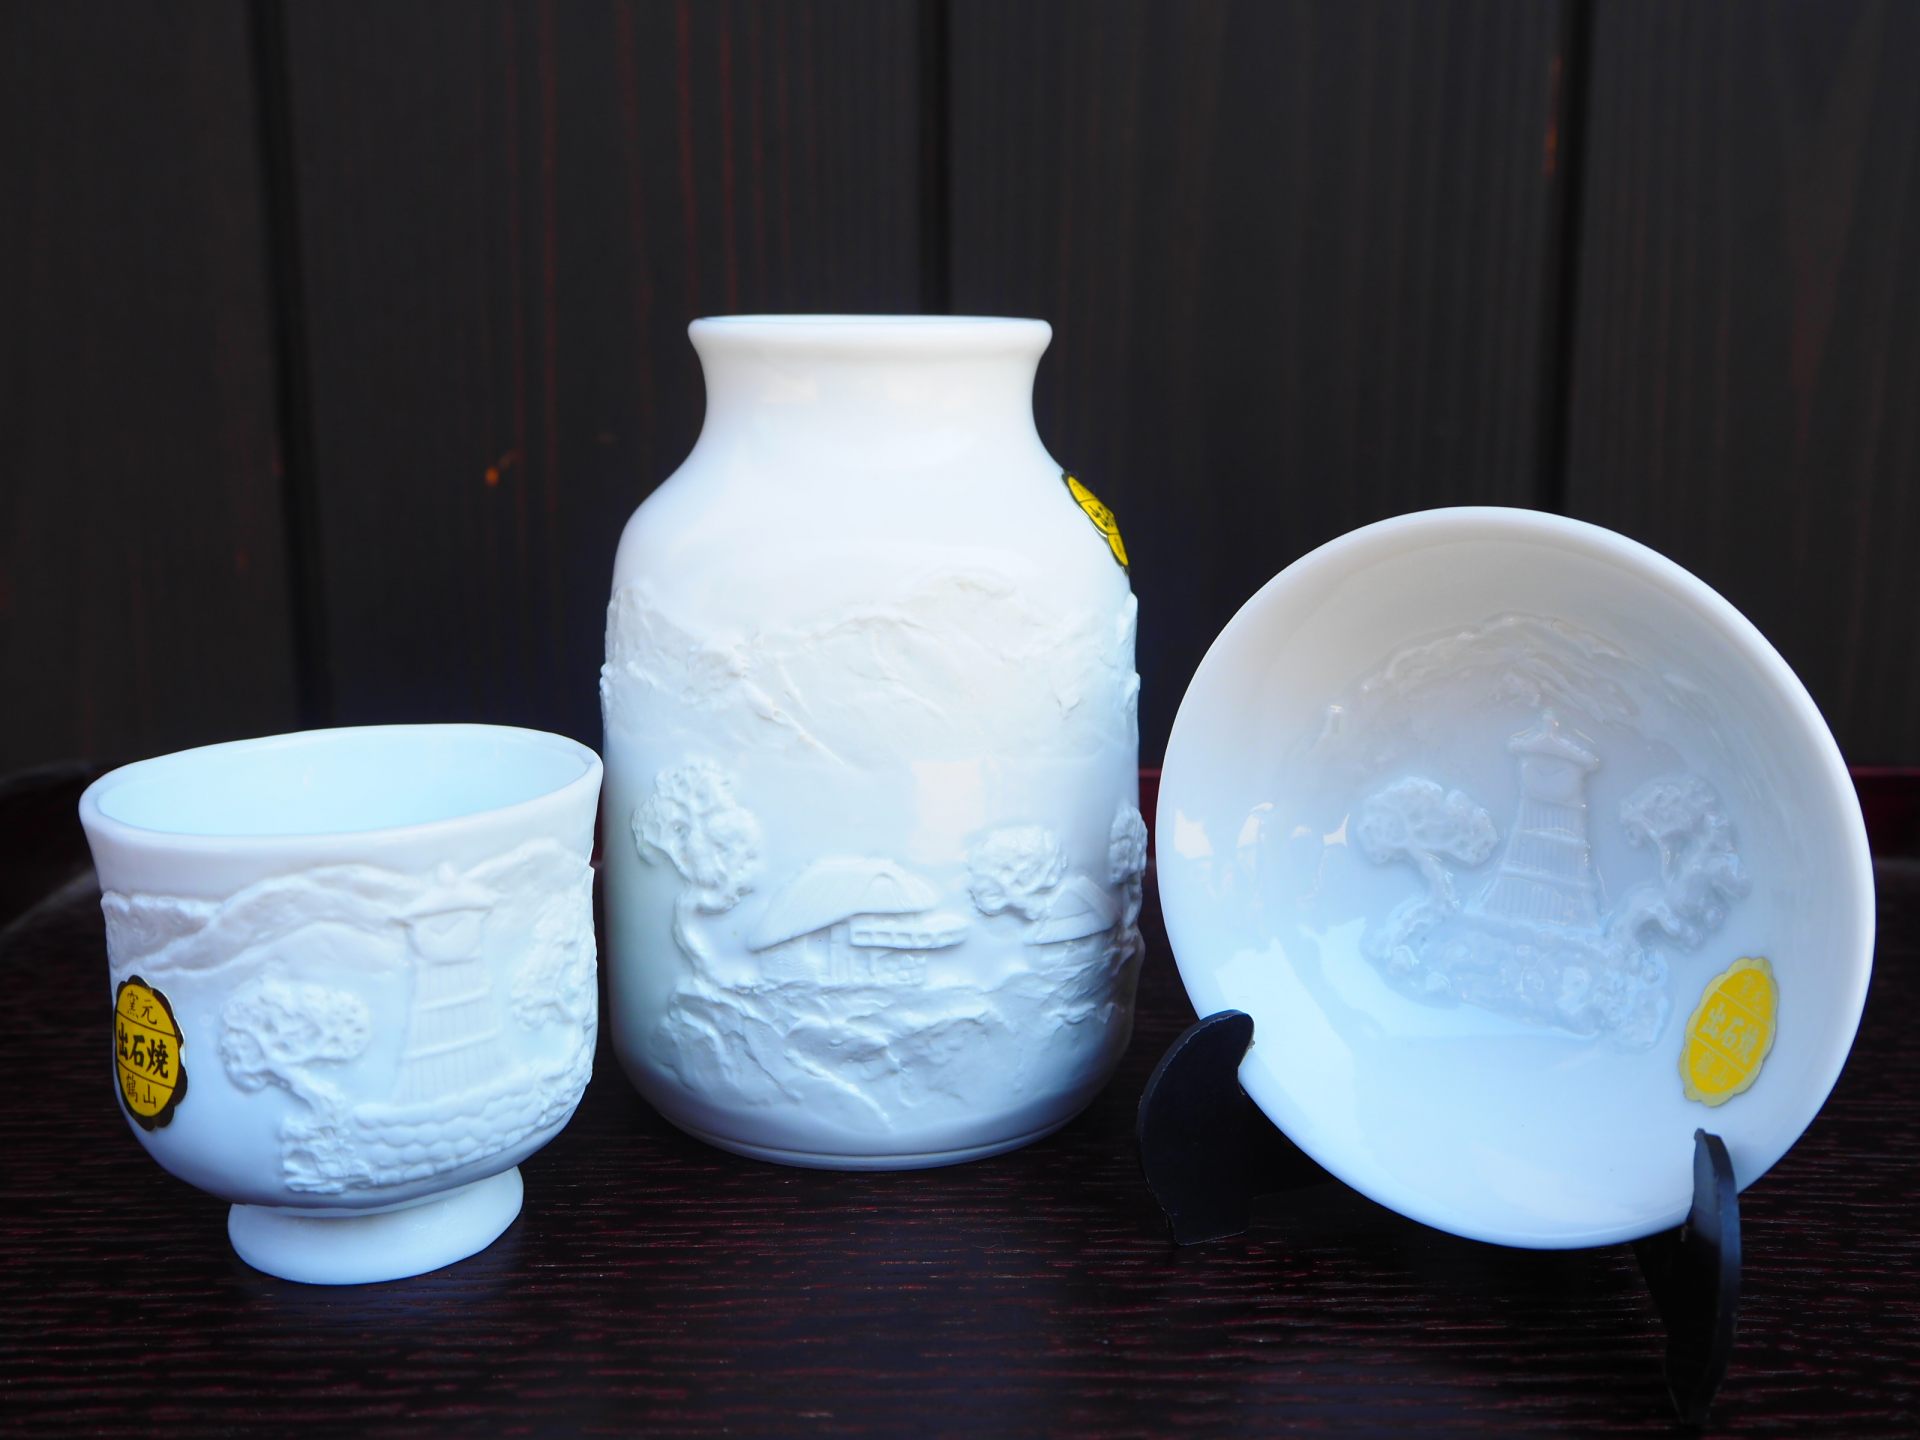 Popular souvenir, Izushi yaki is rare white pottery with a silky-smooth, white surface.